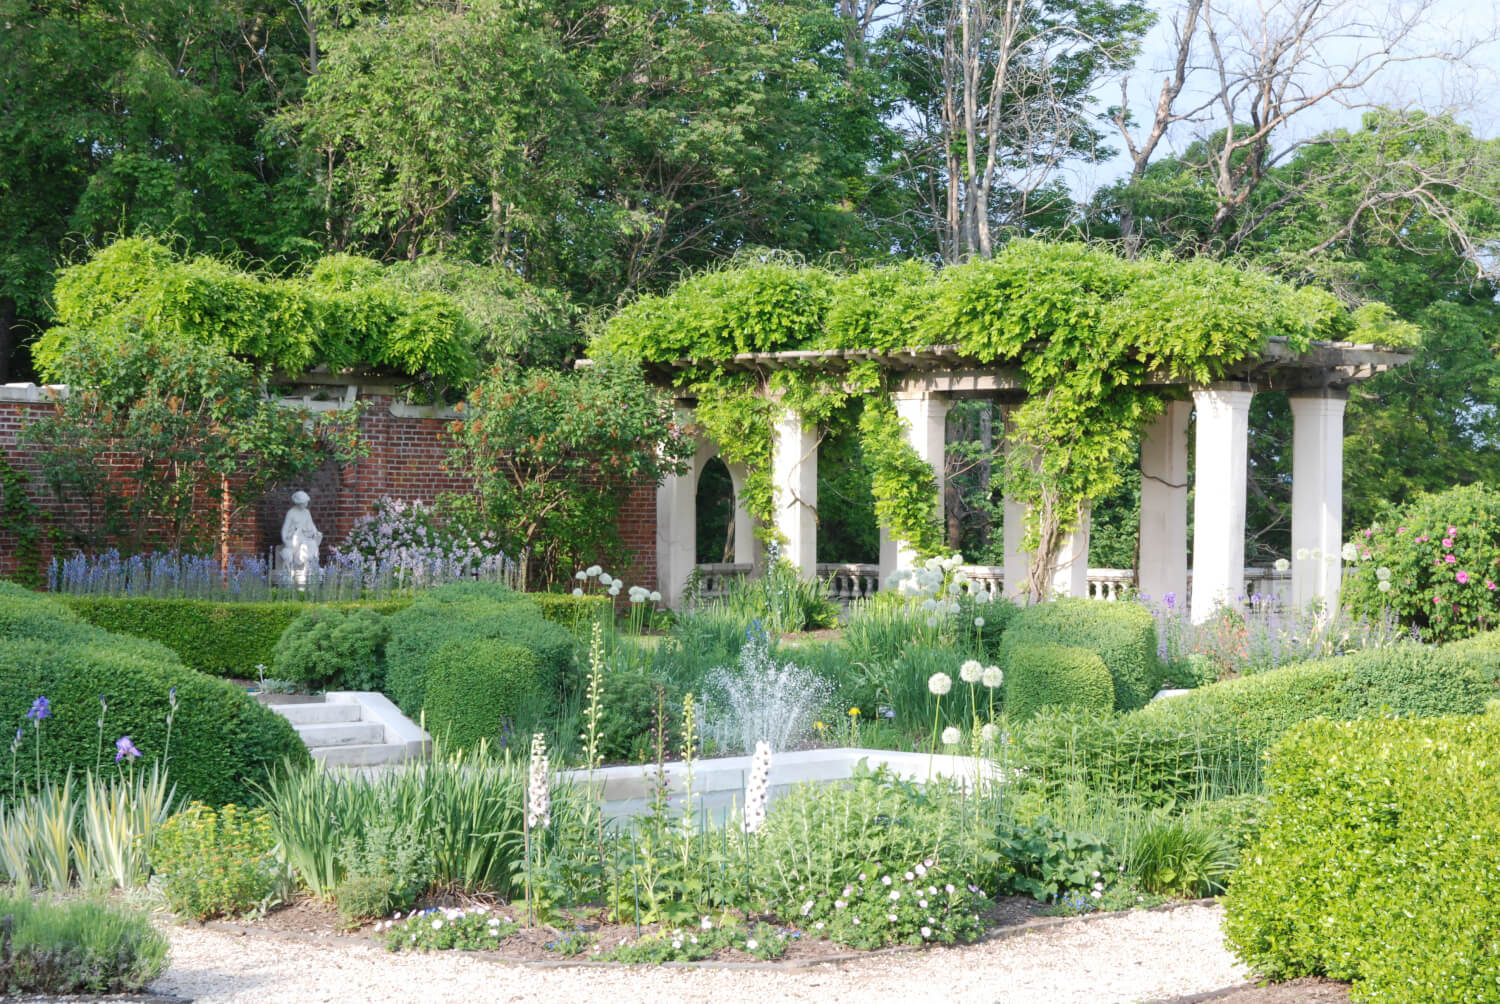 Charlotte Garden Club presents Gardens of the Hudson Valley The